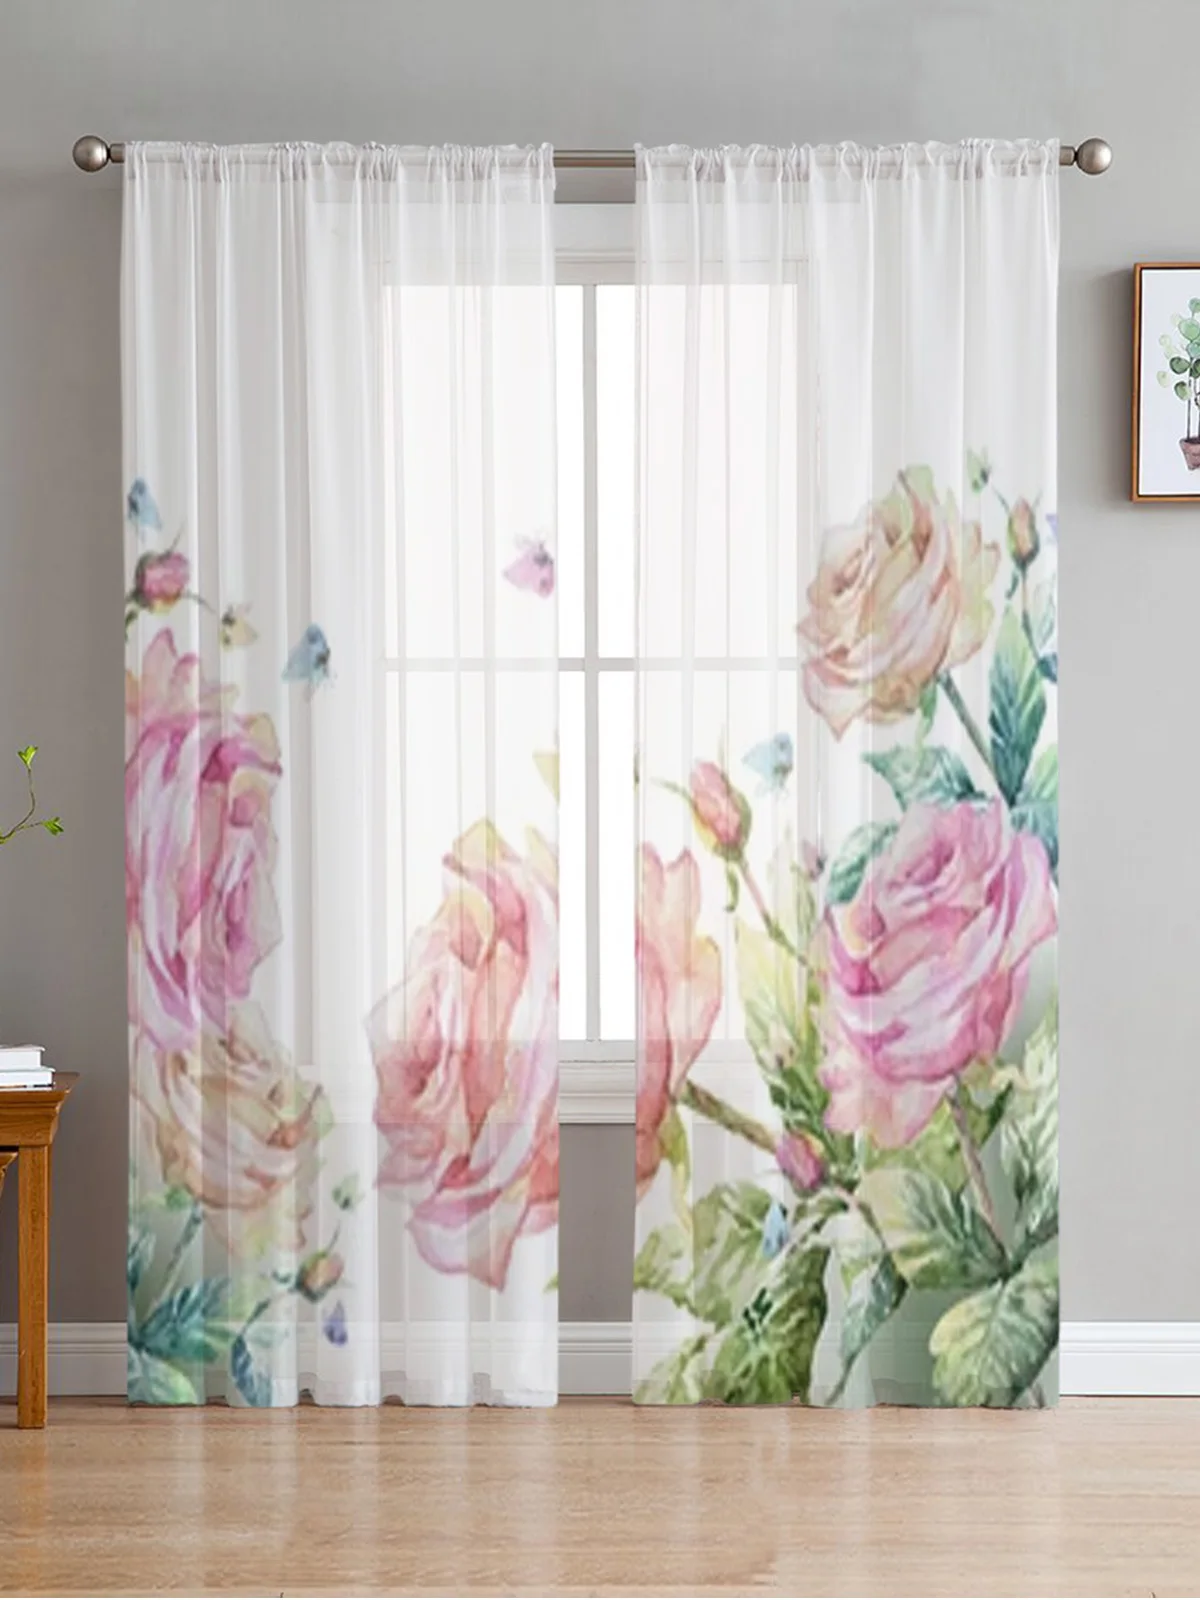 

Pink Roses With Butterflies Sheer Curtains Bedroom Voile Curtain Living Room Window Sheer Curtains Kitchen Tulle Drapes